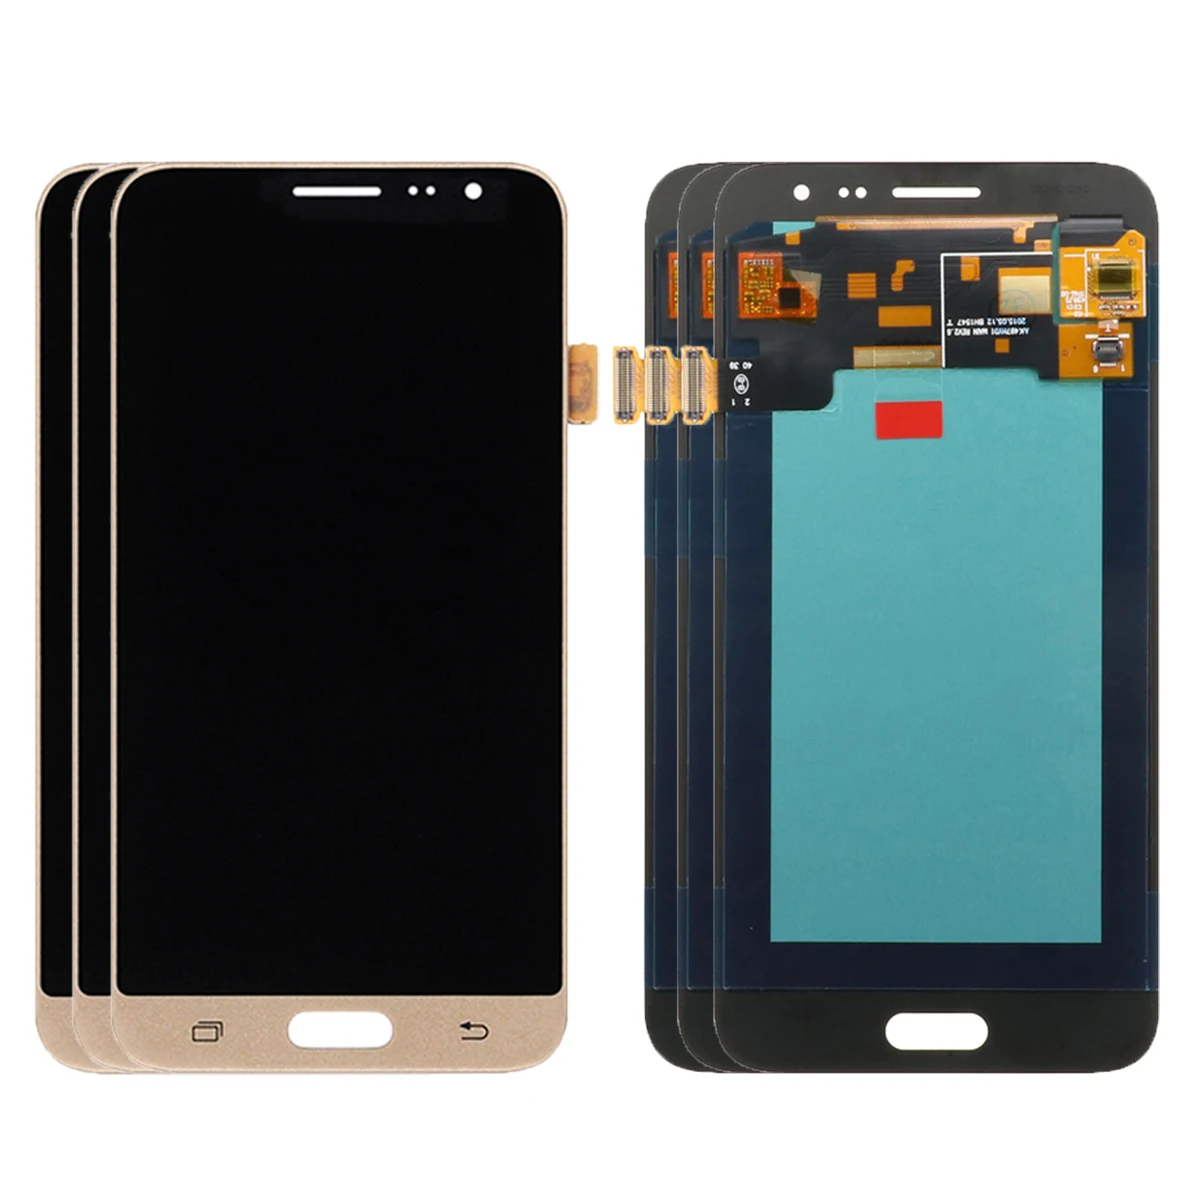 Wholesale j320 Display For Samsung Galaxy J3 2016 J320 lcd SM-J320F J320FN j320 LCD with Touch Screen Digitizer Assembly + Tools enlarge